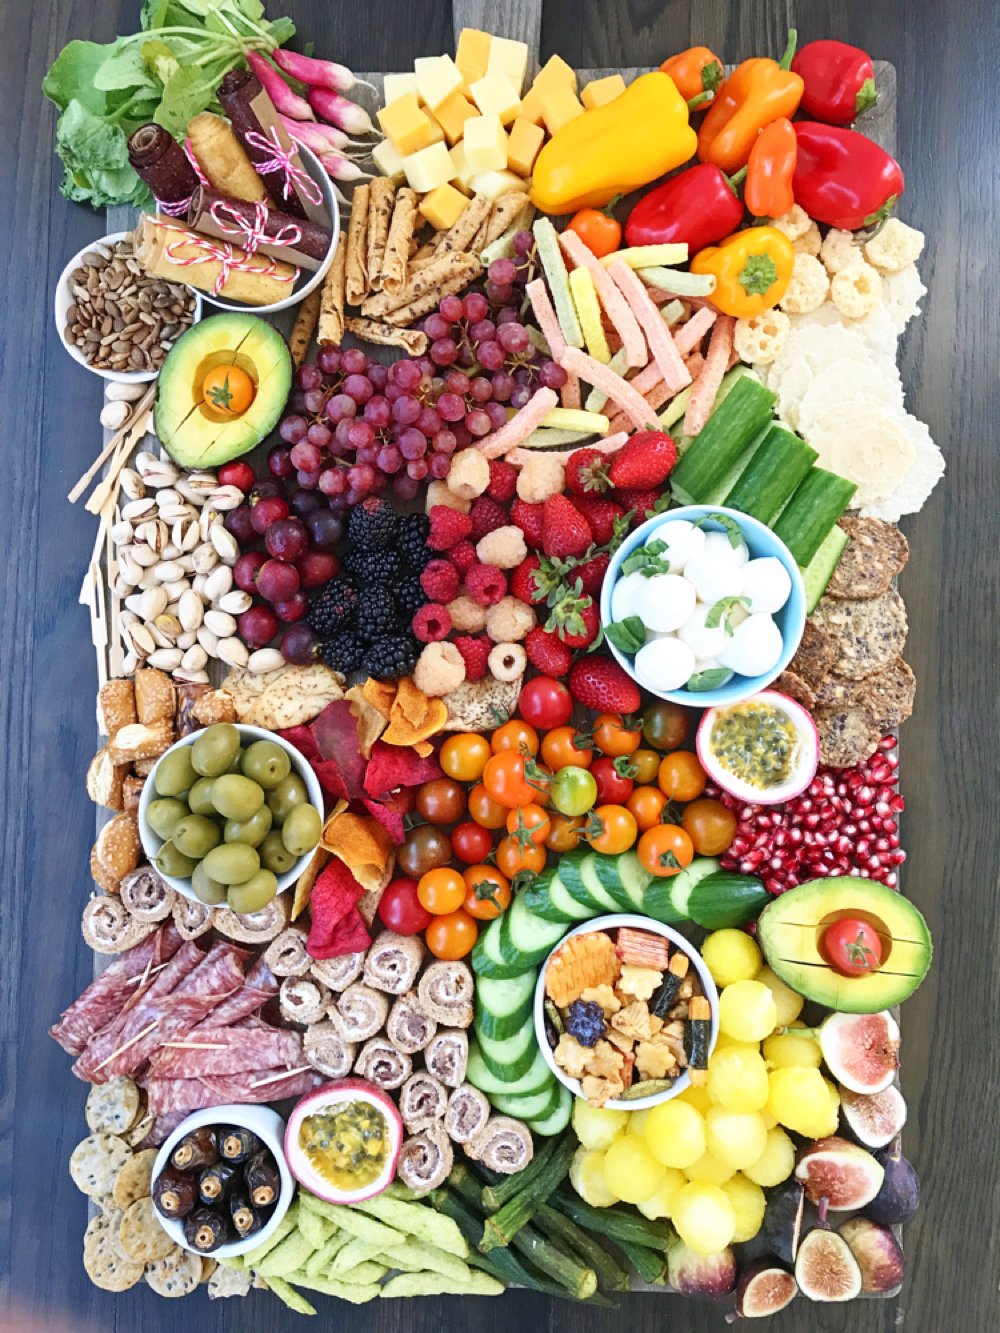 Ultimate Snack Platters from Weelicious.com